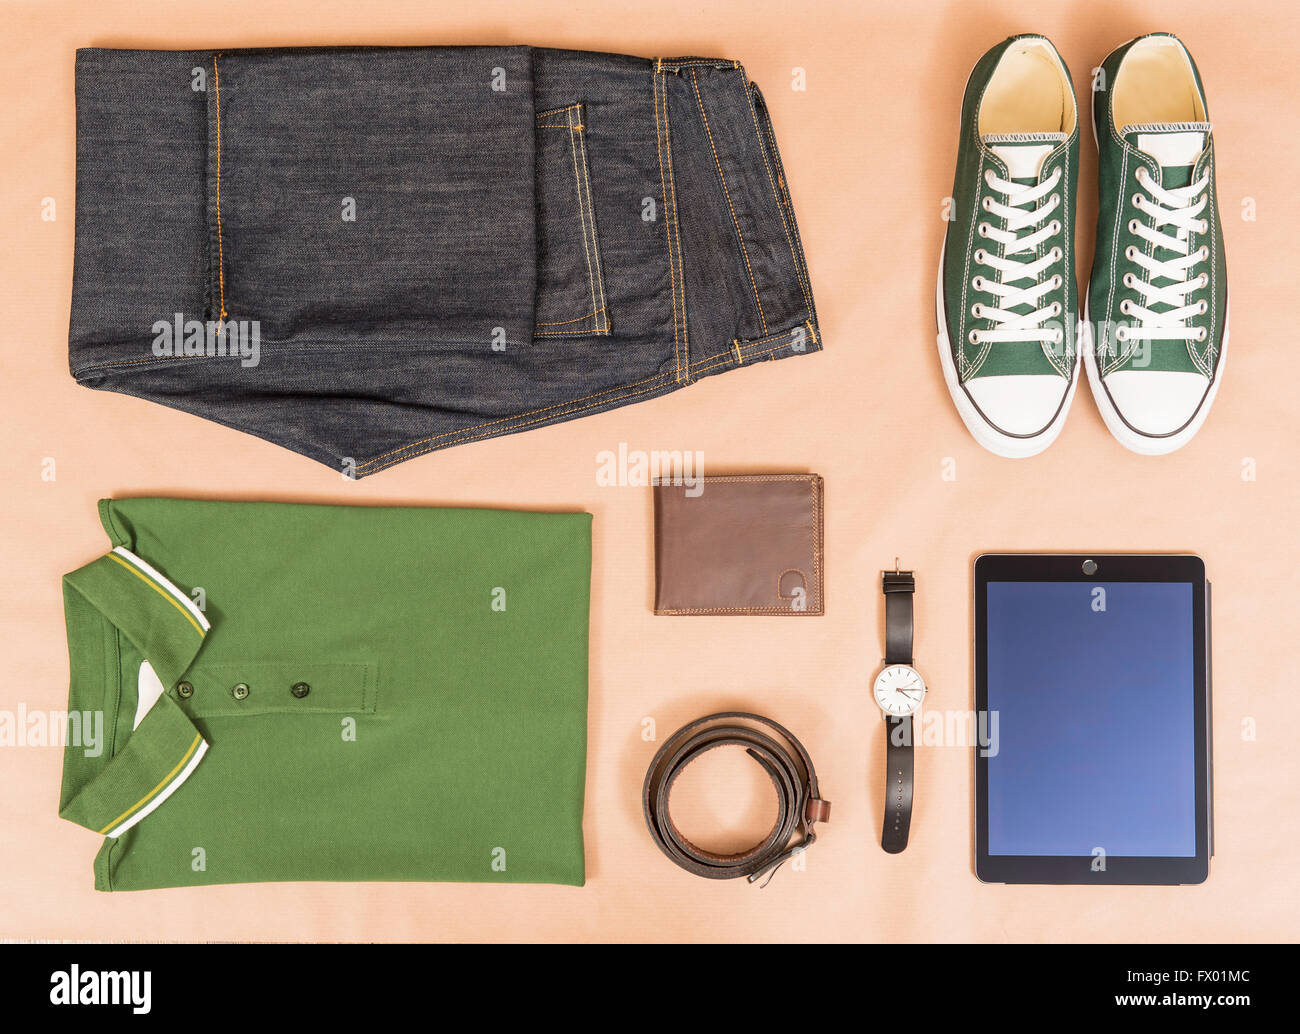 Mens clothing from directly above in knolling style Stock Photo